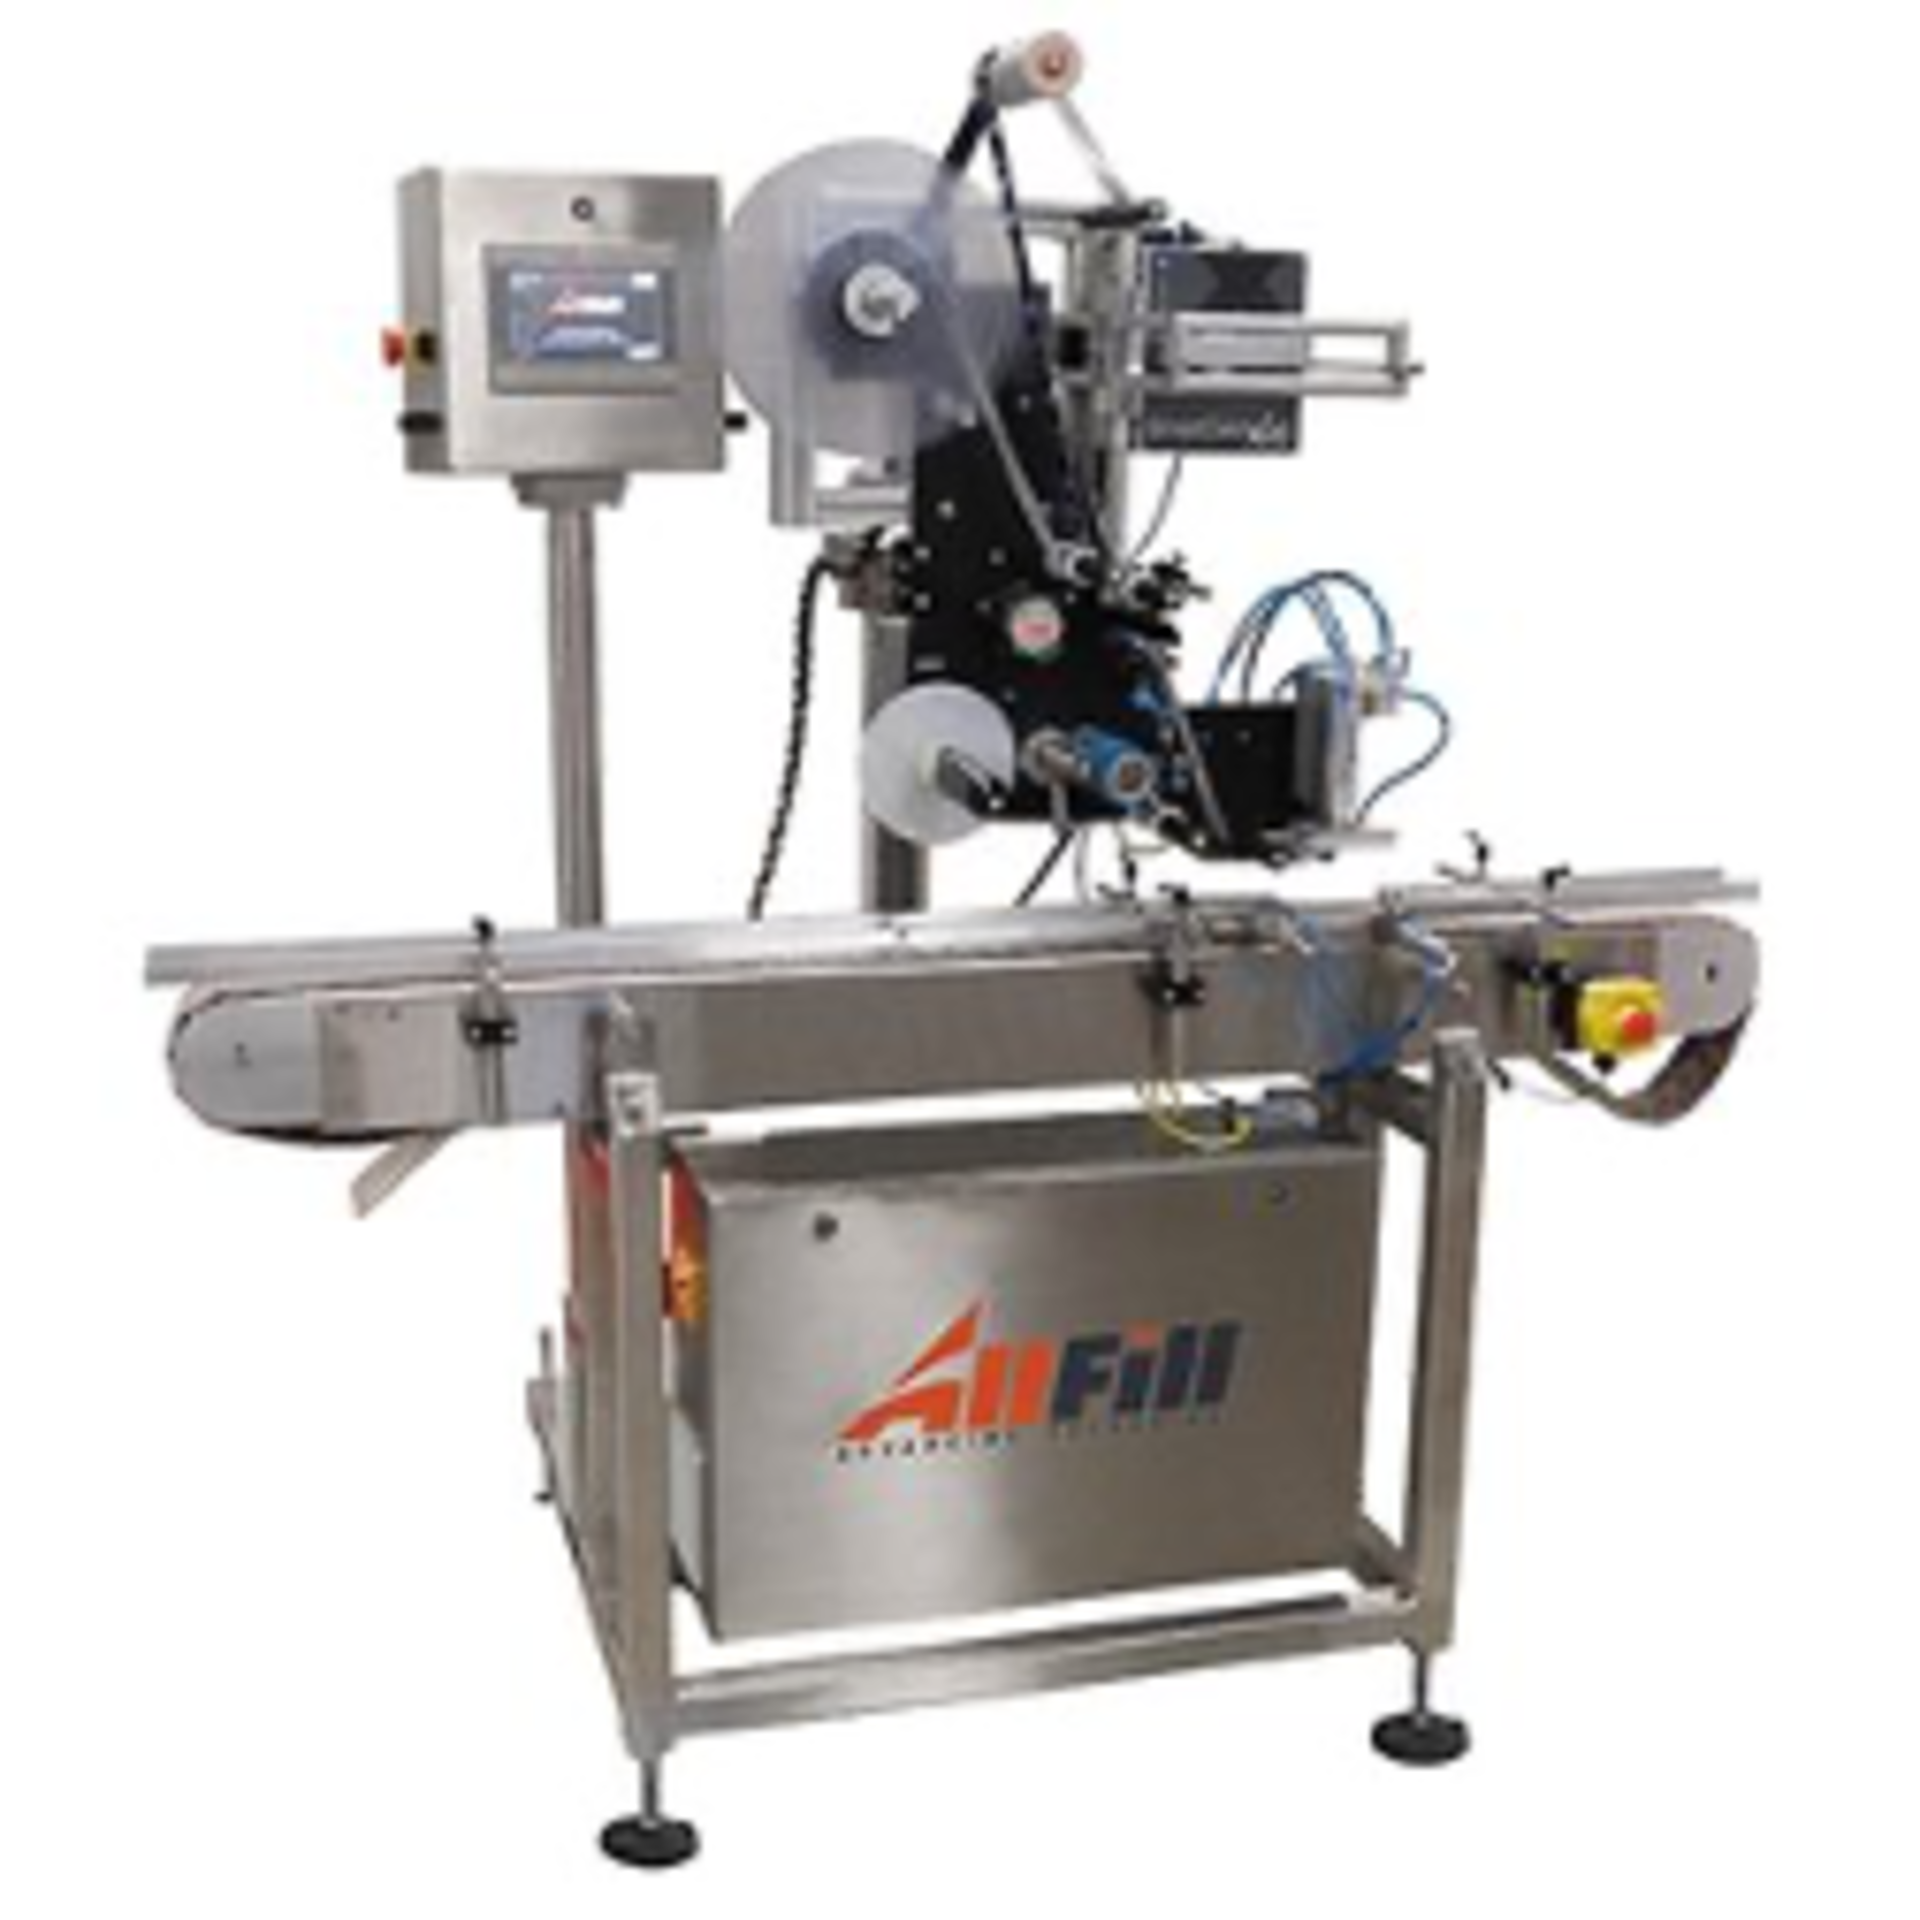 (Located in Waterfall, PA) All Fill Advance Packaging Machine